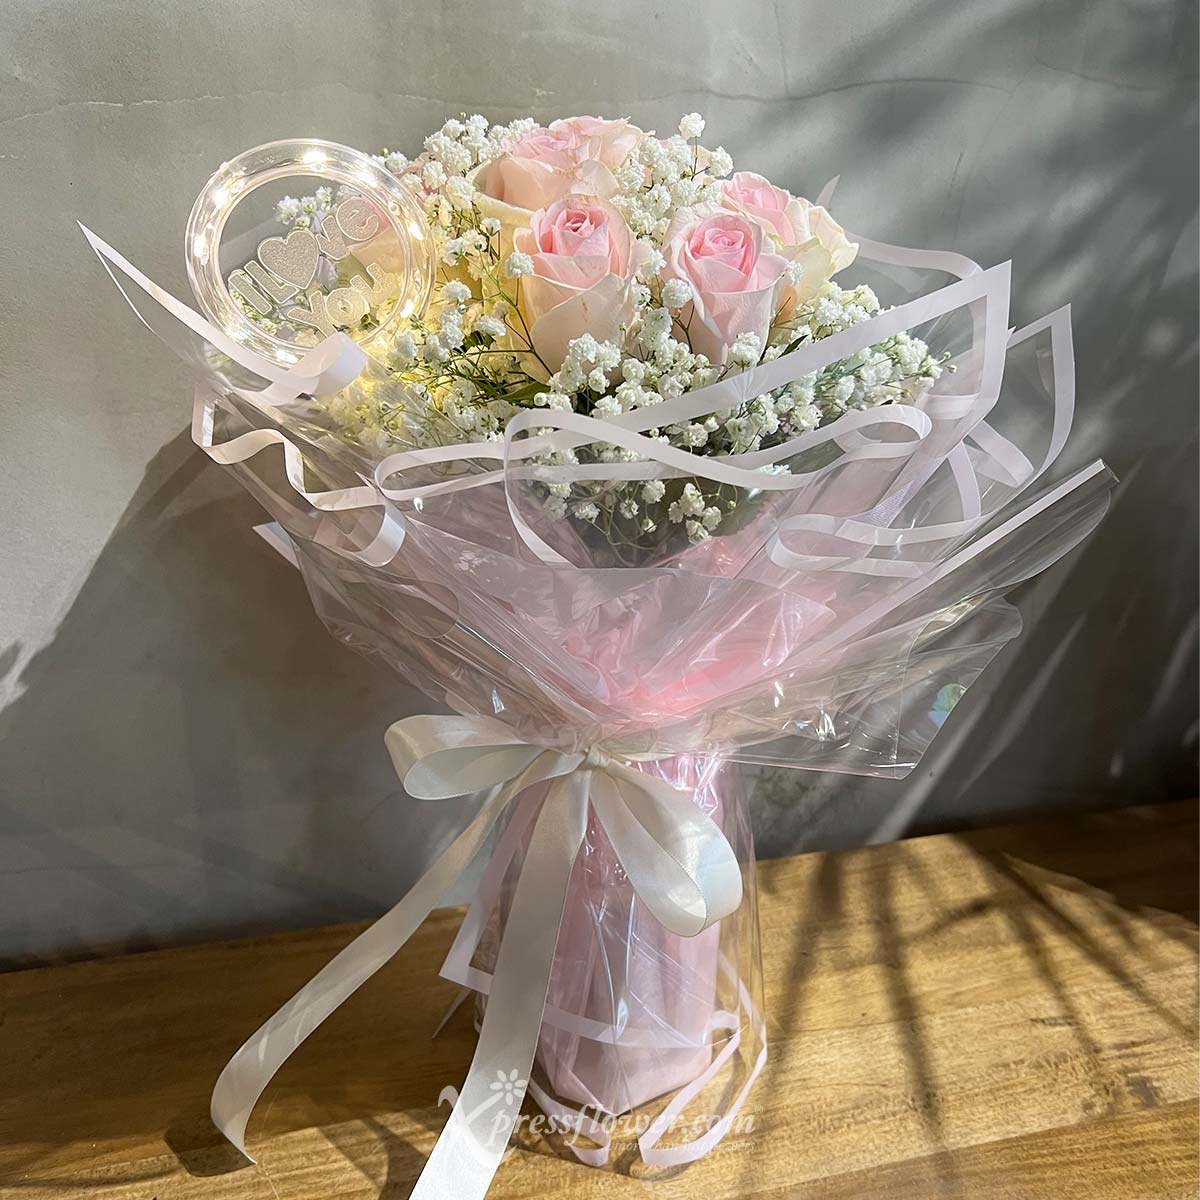 Graceful Treasure (11 Centre Pink Roses with "I Love You" LED Light) 